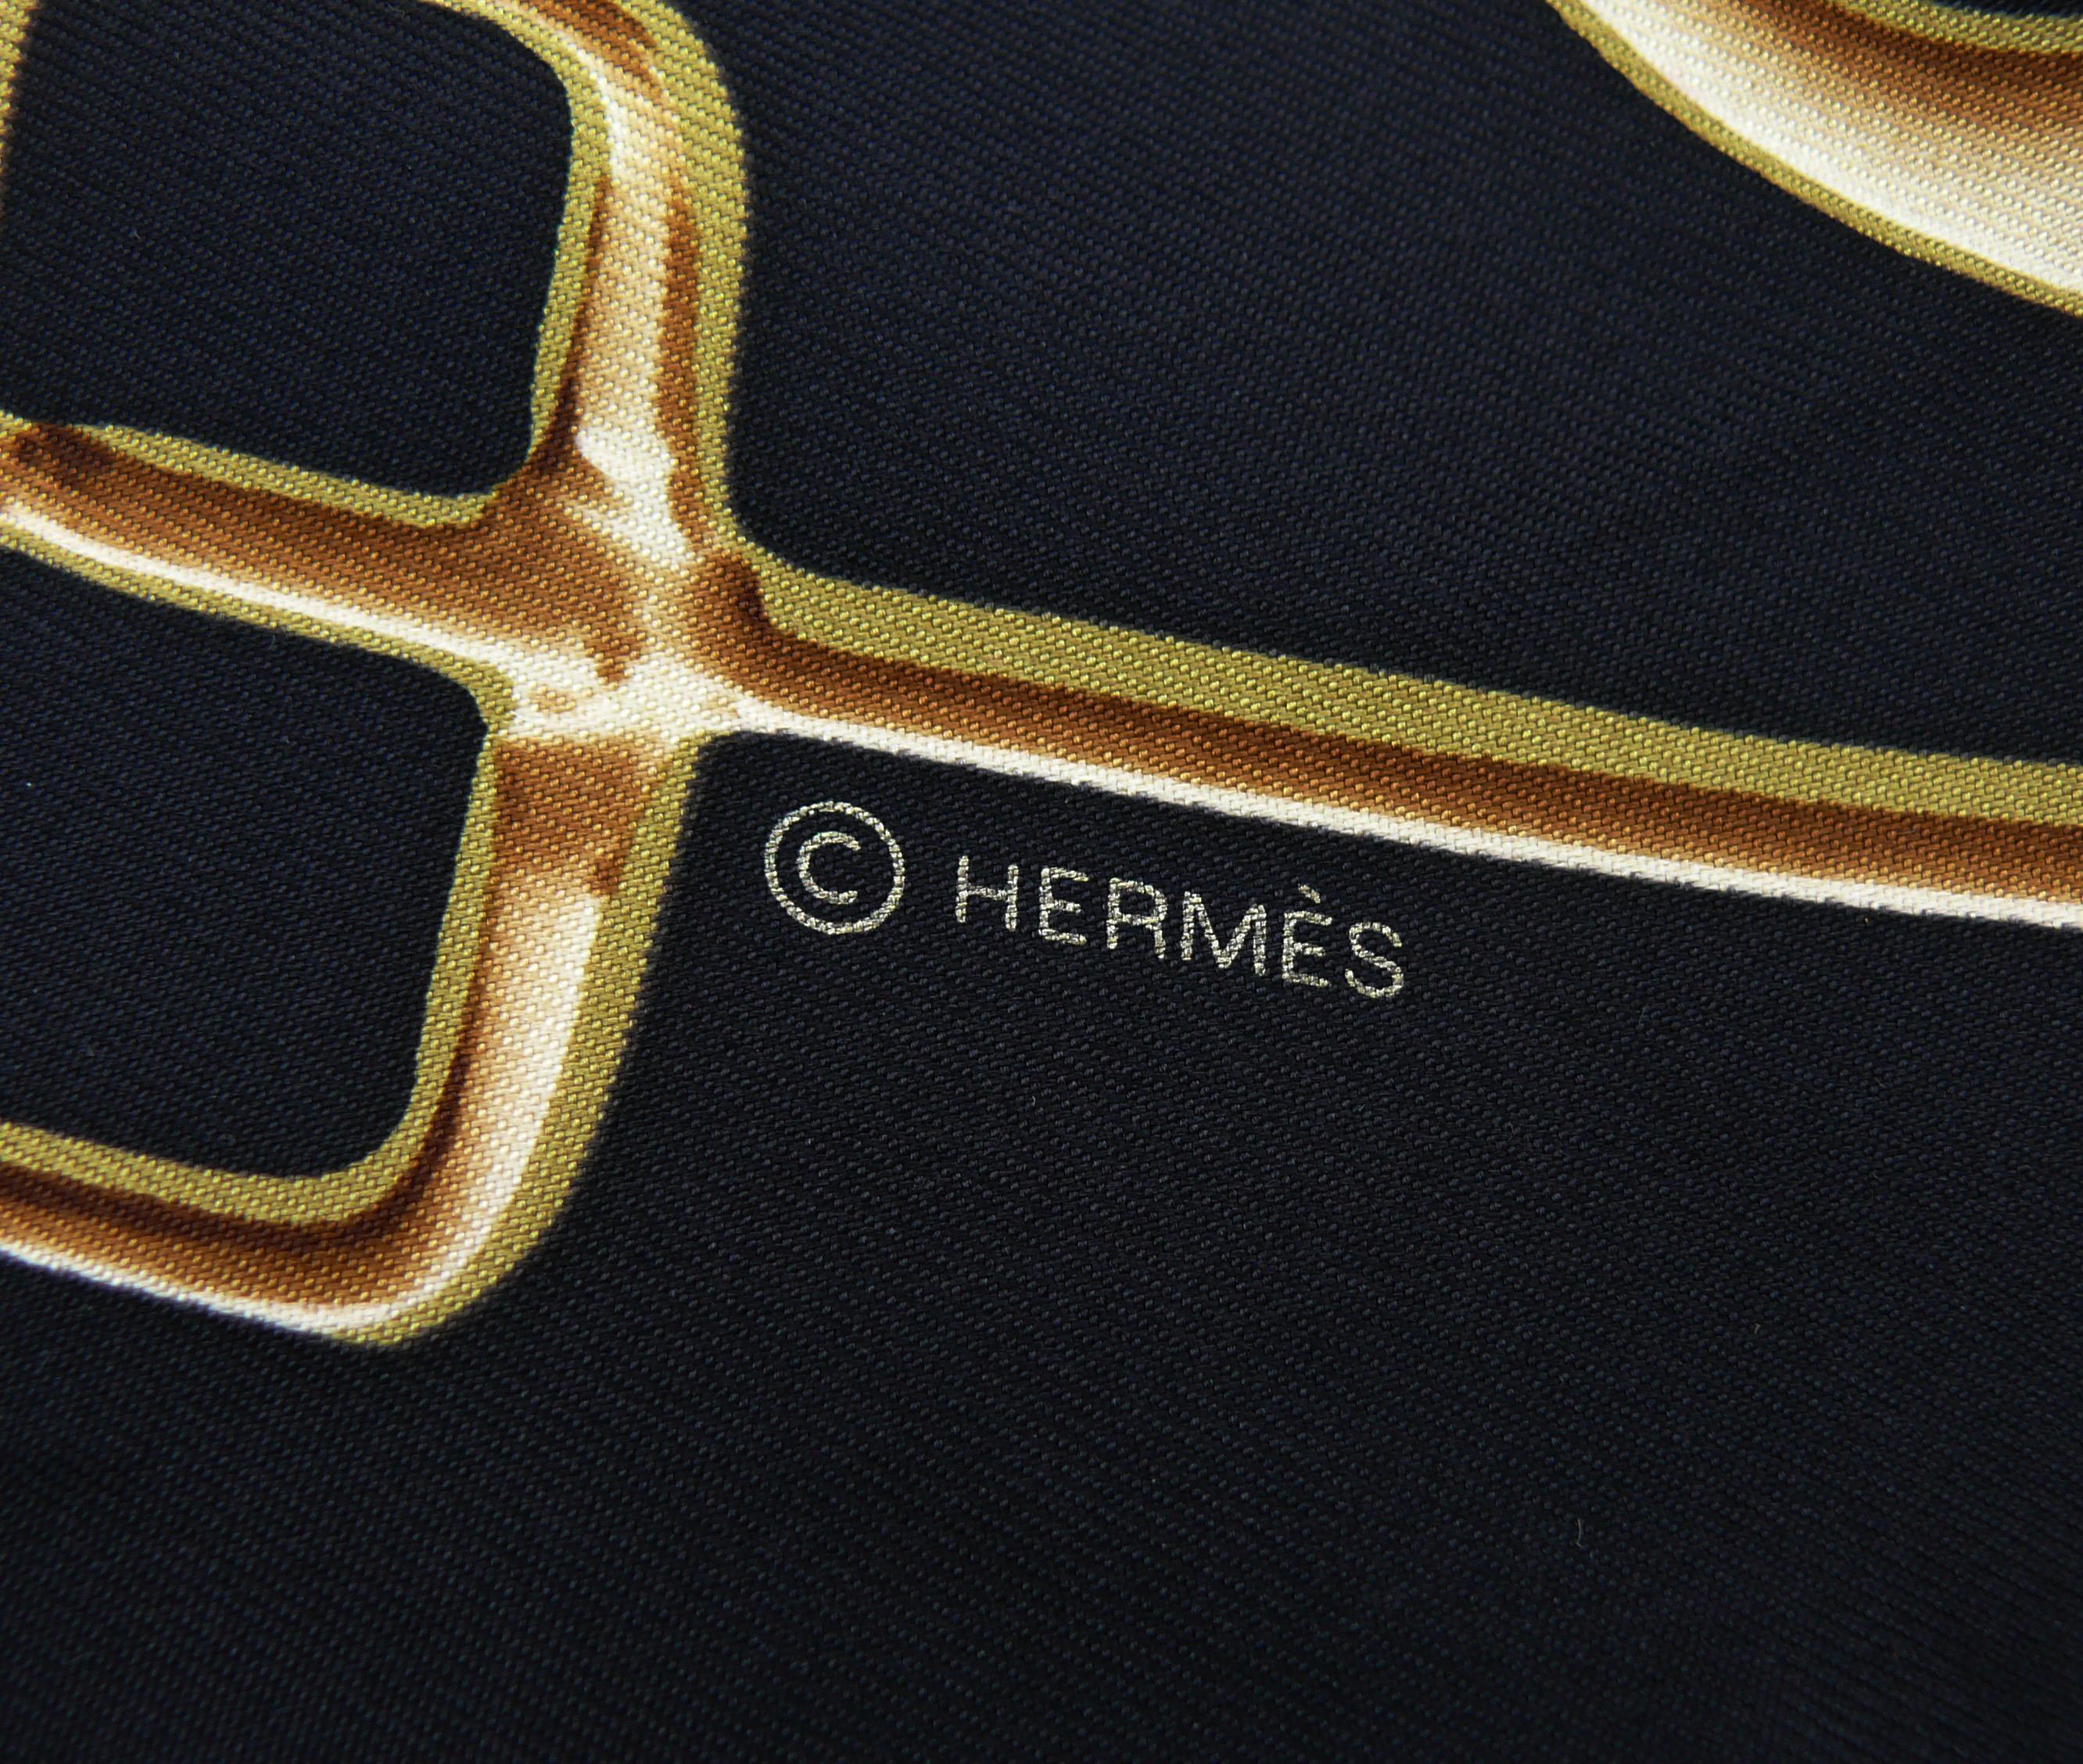 Hermes Black & Gold Silk Carre Scarf Cheval Fusion by Dimitri Rybaltchenko For Sale 1